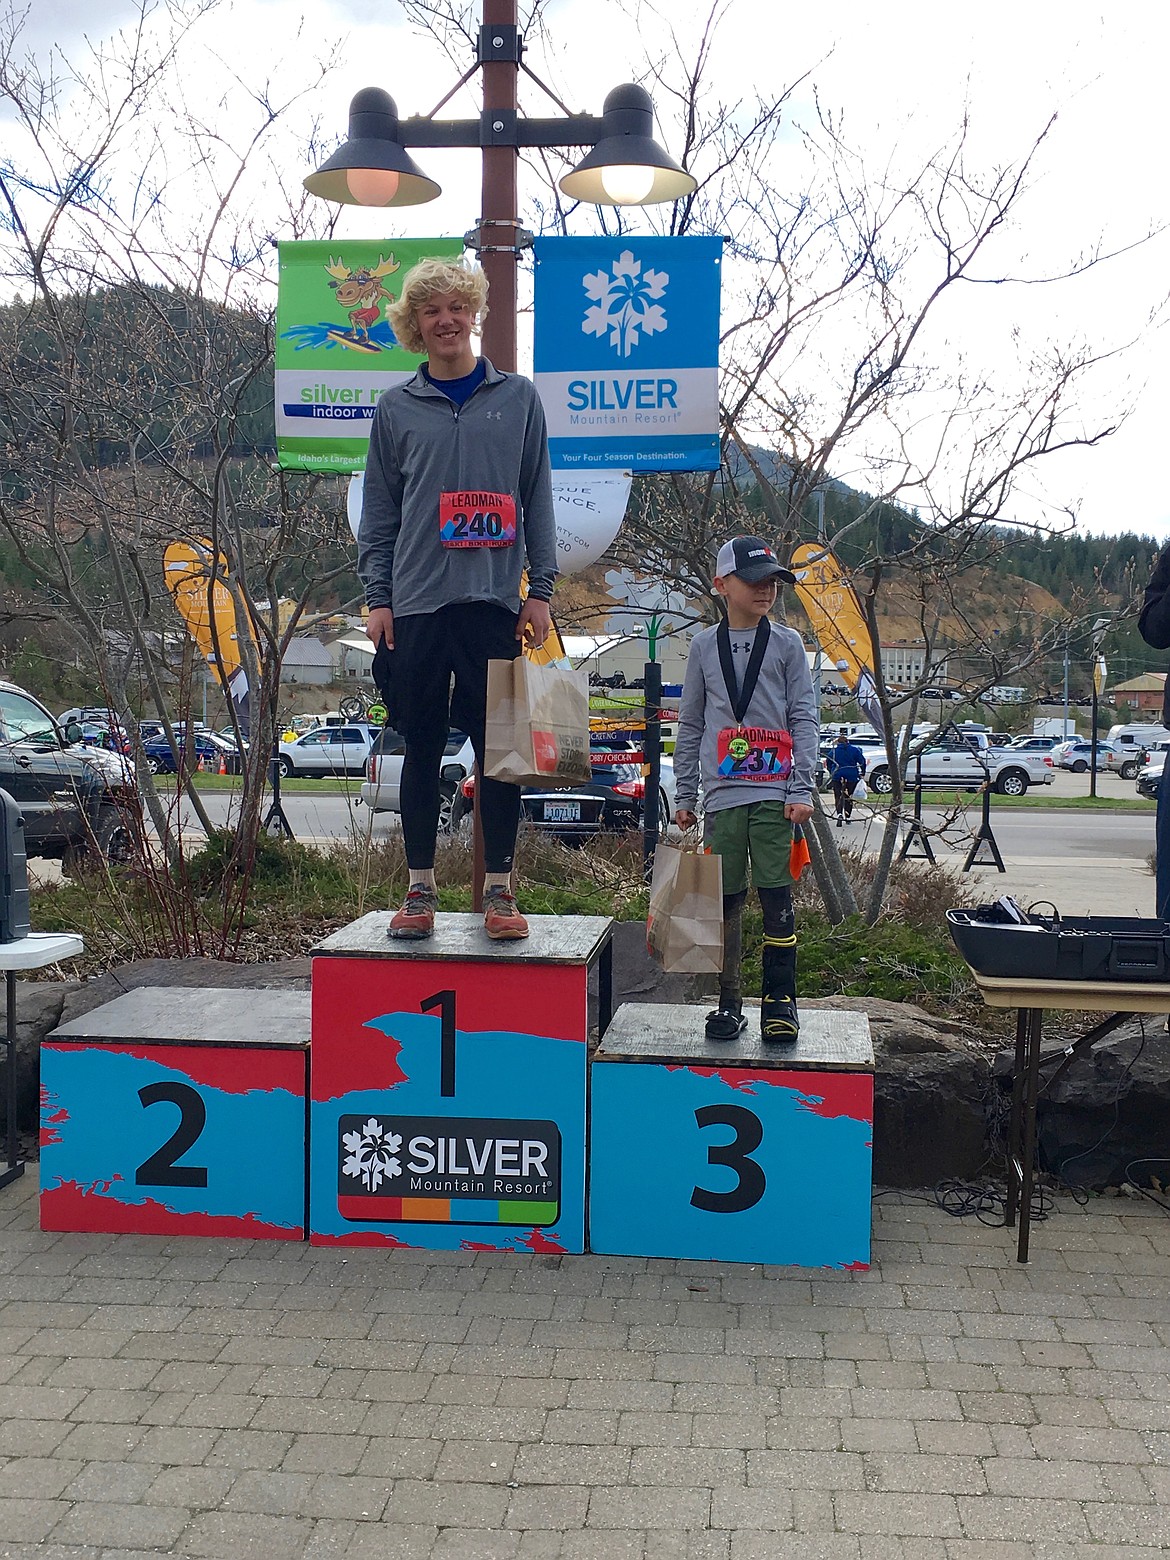 On the younger side, Tyler Gustaveson and Caleb Adams take 1st and 3rd place, respectively, in the kids division.